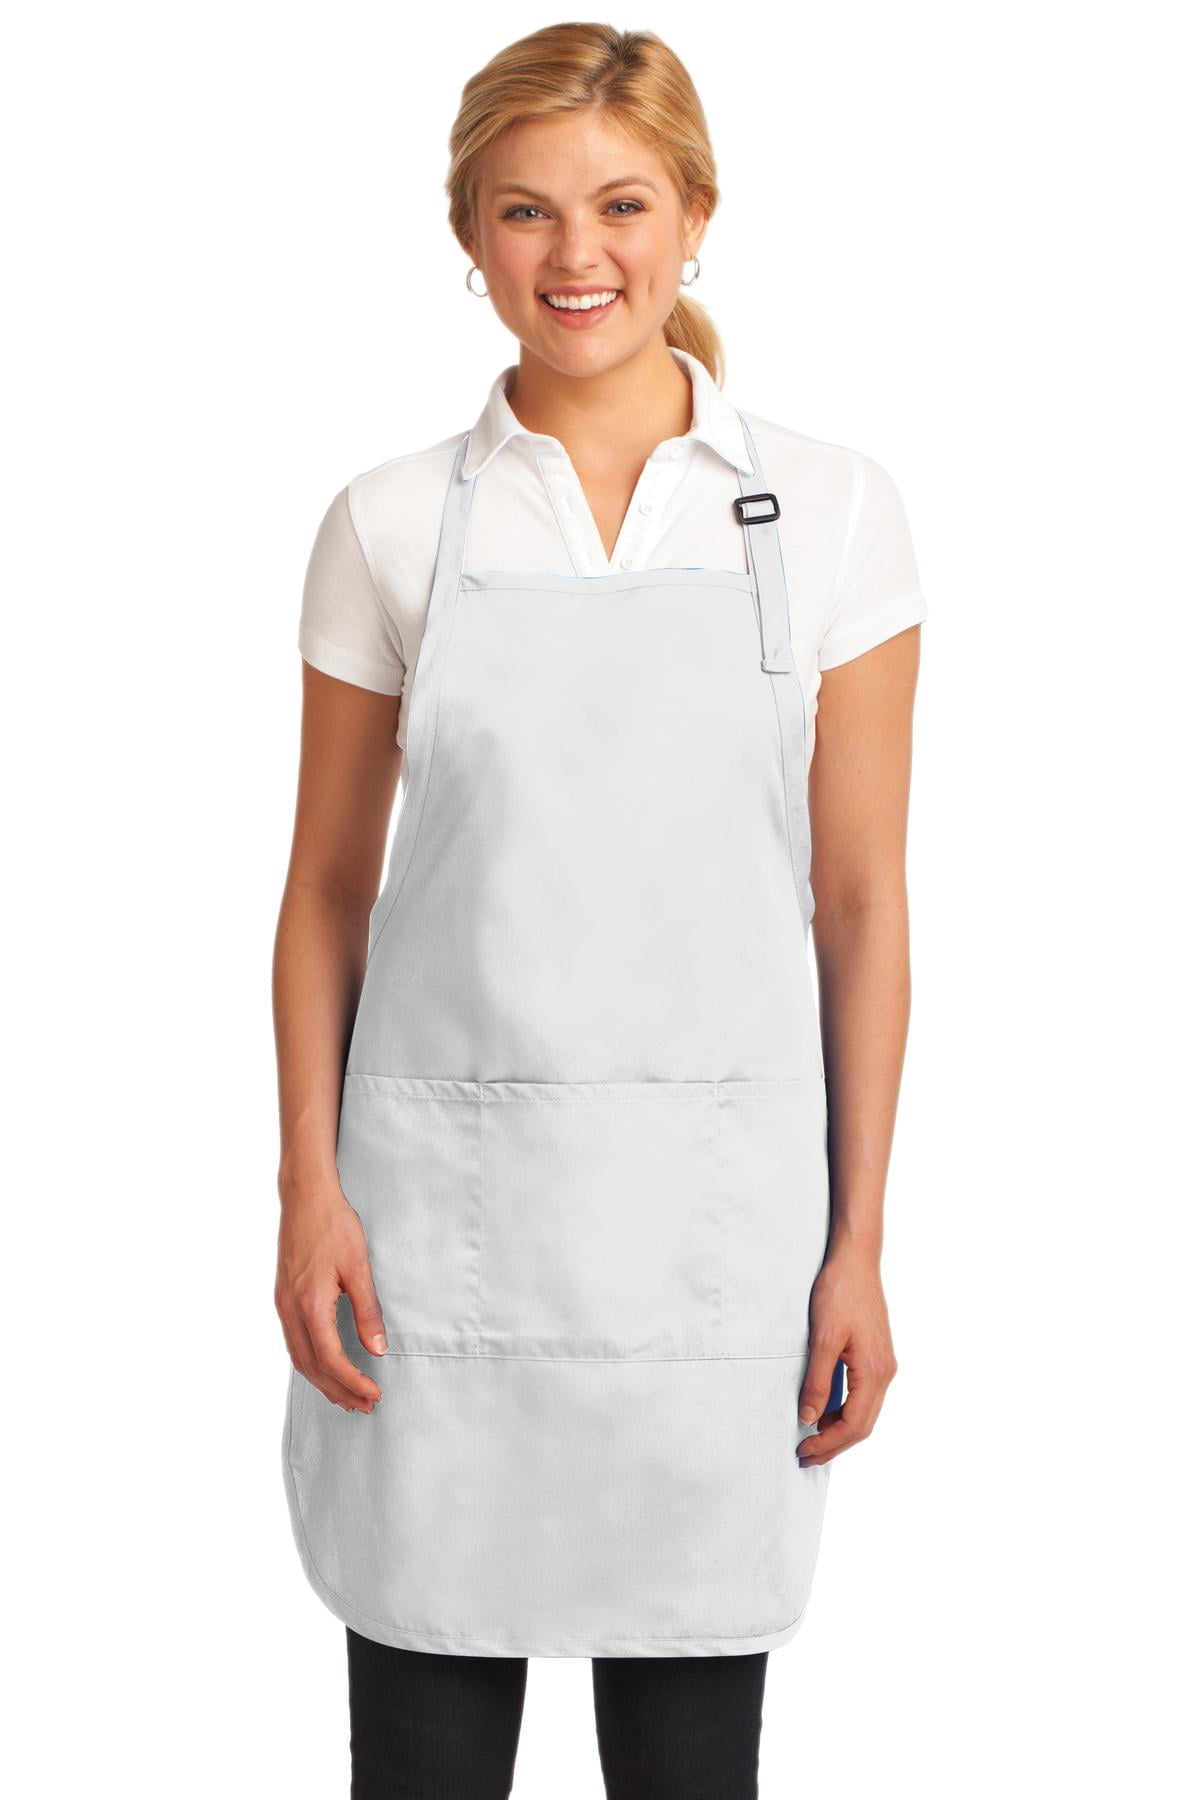 ADULT STAIN RELEASE TWO POCKETS FULL LENGTH APRON ADJUSTABLE 1" WIDE STRAPS 